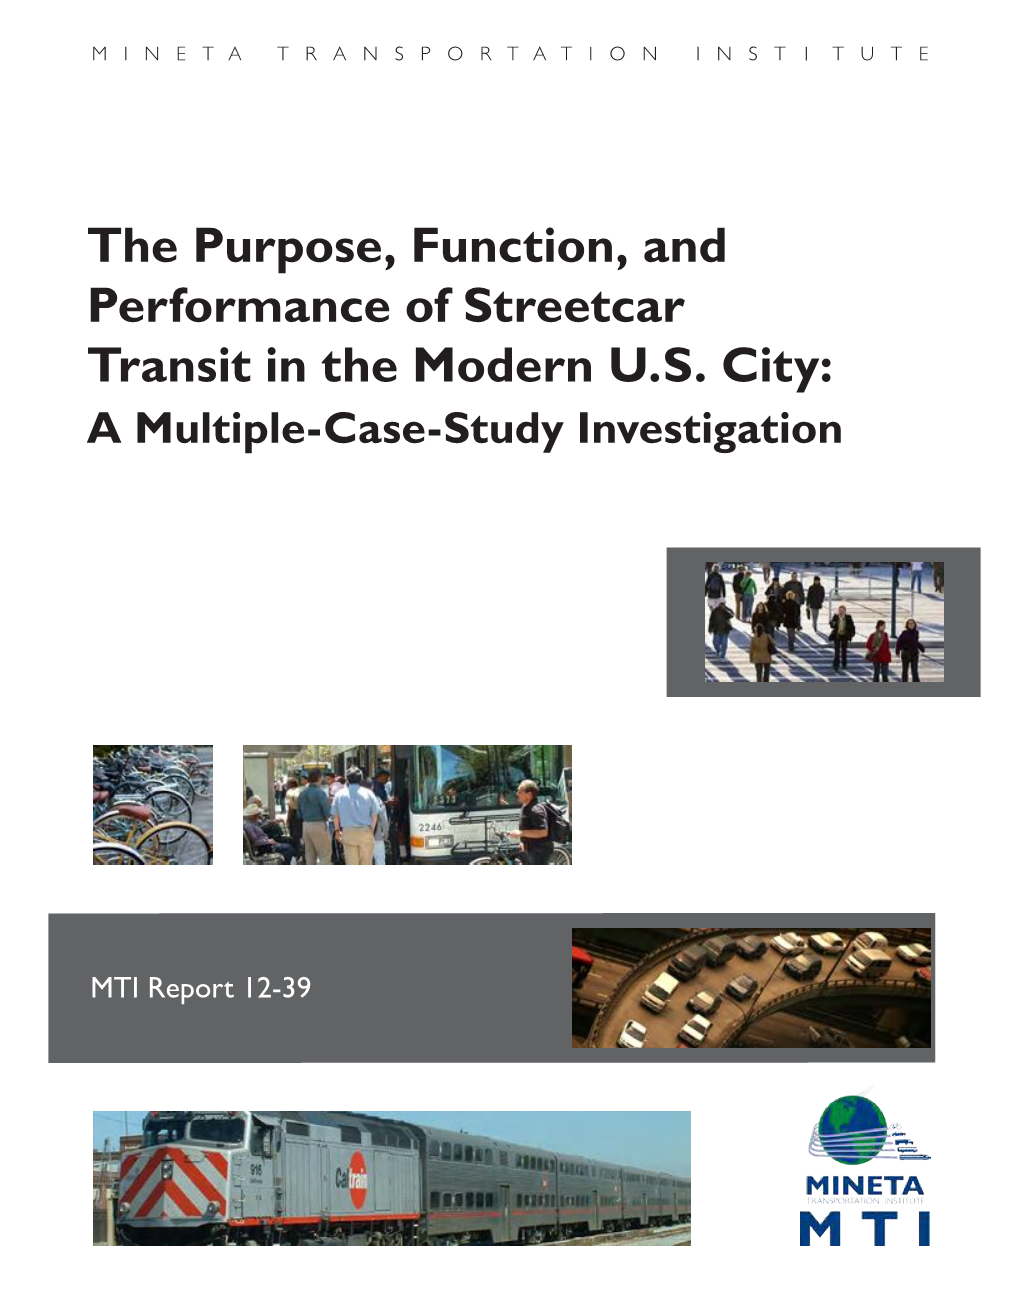 The Purpose, Function, and Performance of Streetcar Transit in the Modern U.S